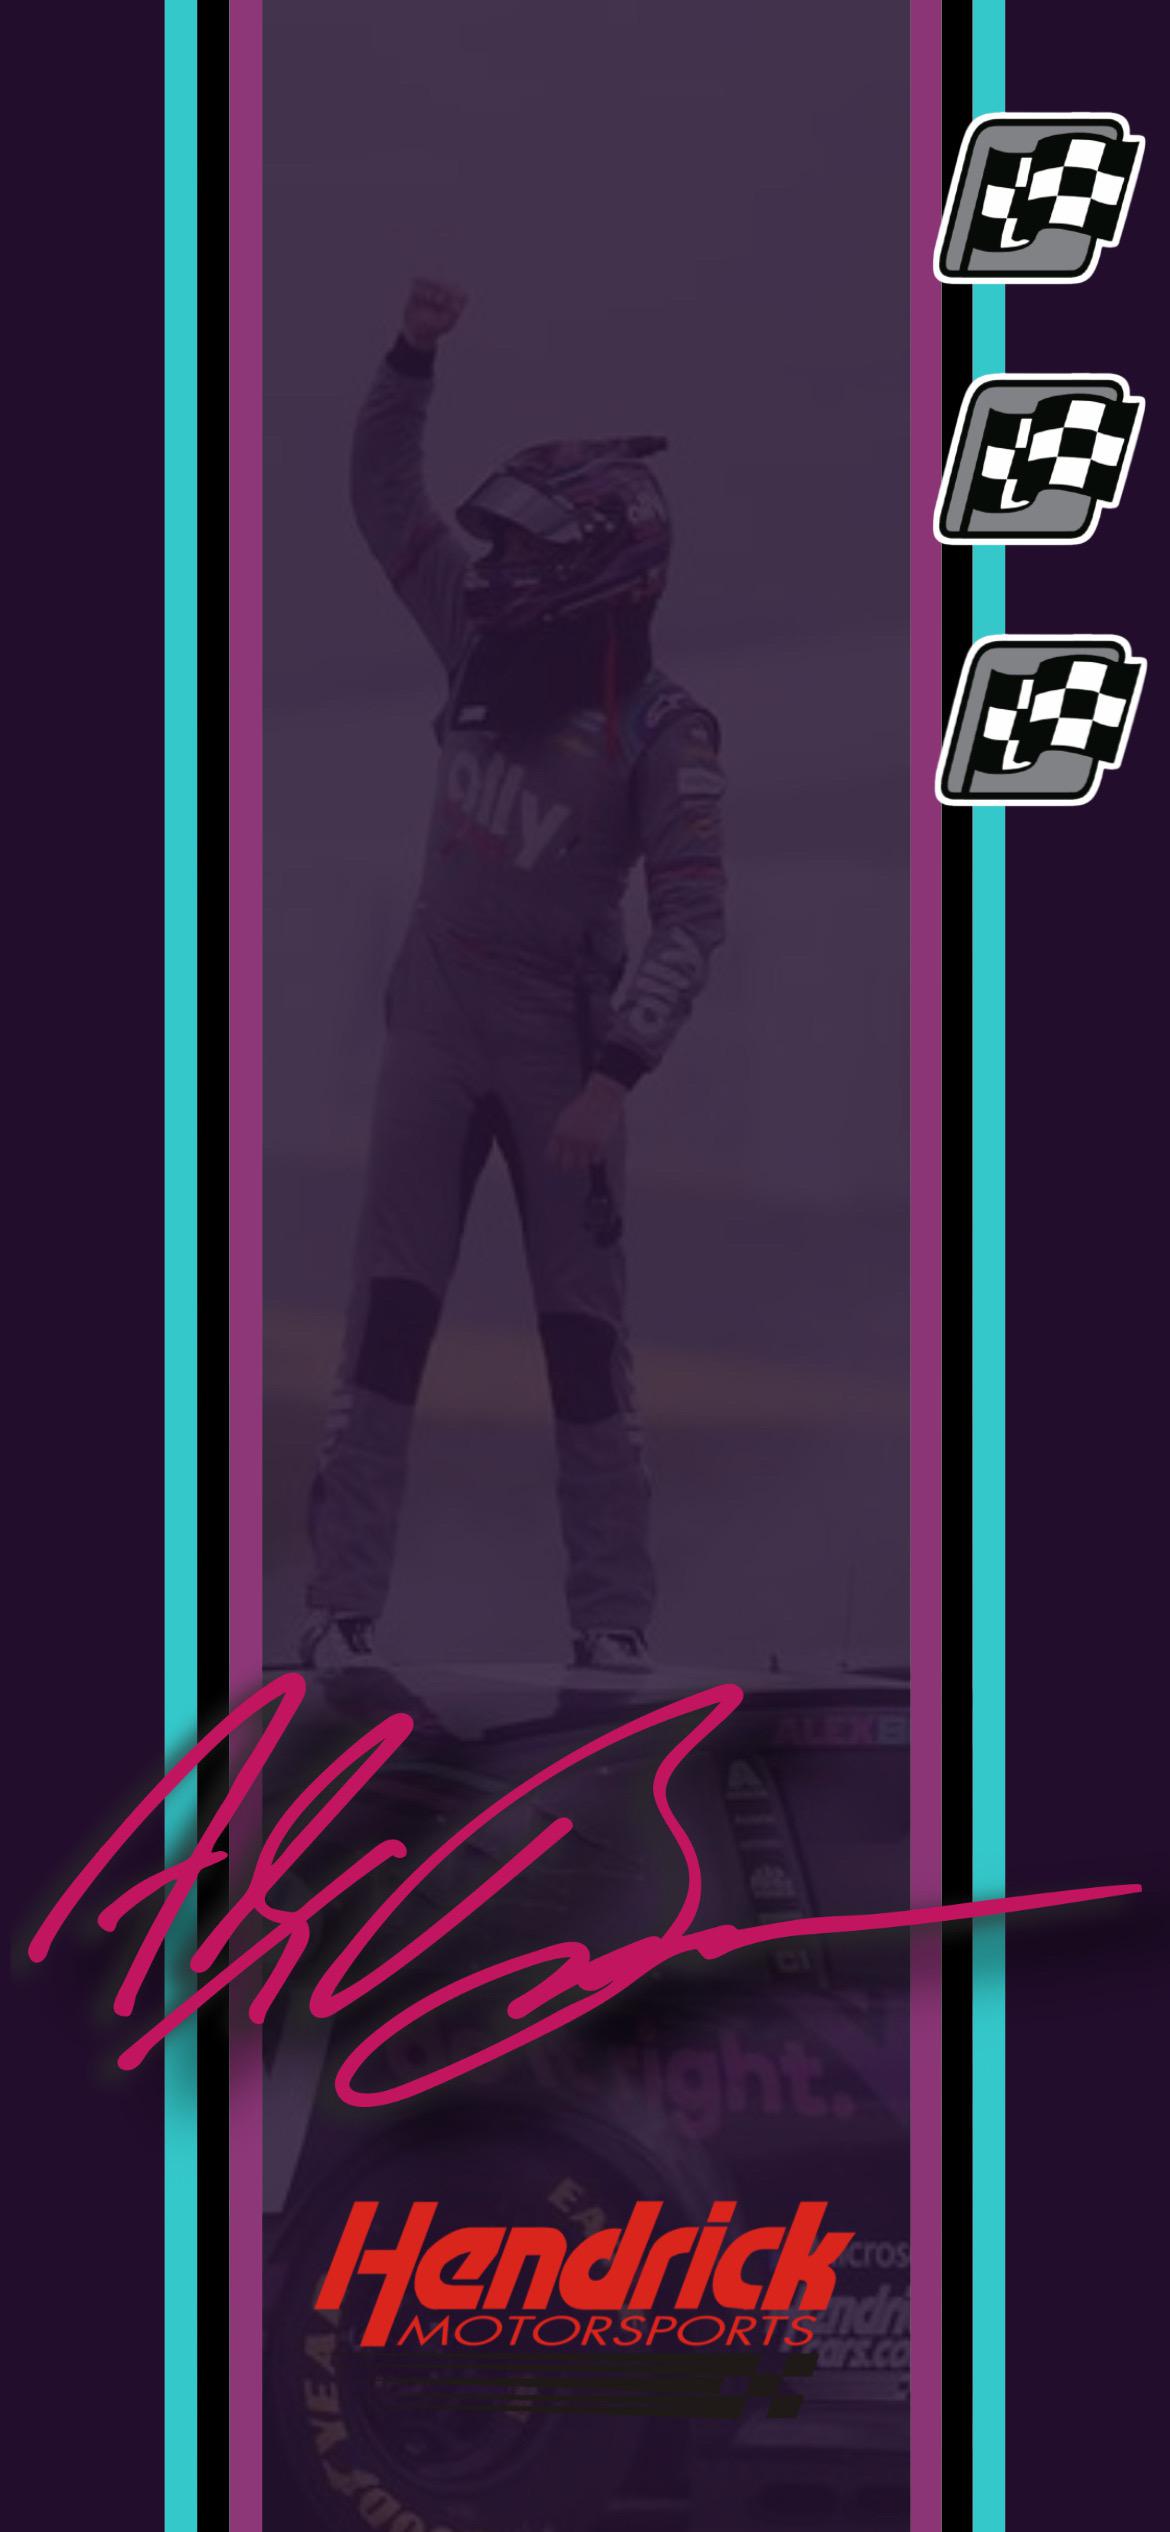 Attempted making an Alex Bowman wallpaper. How do y'all think it turned out and how can I improve?